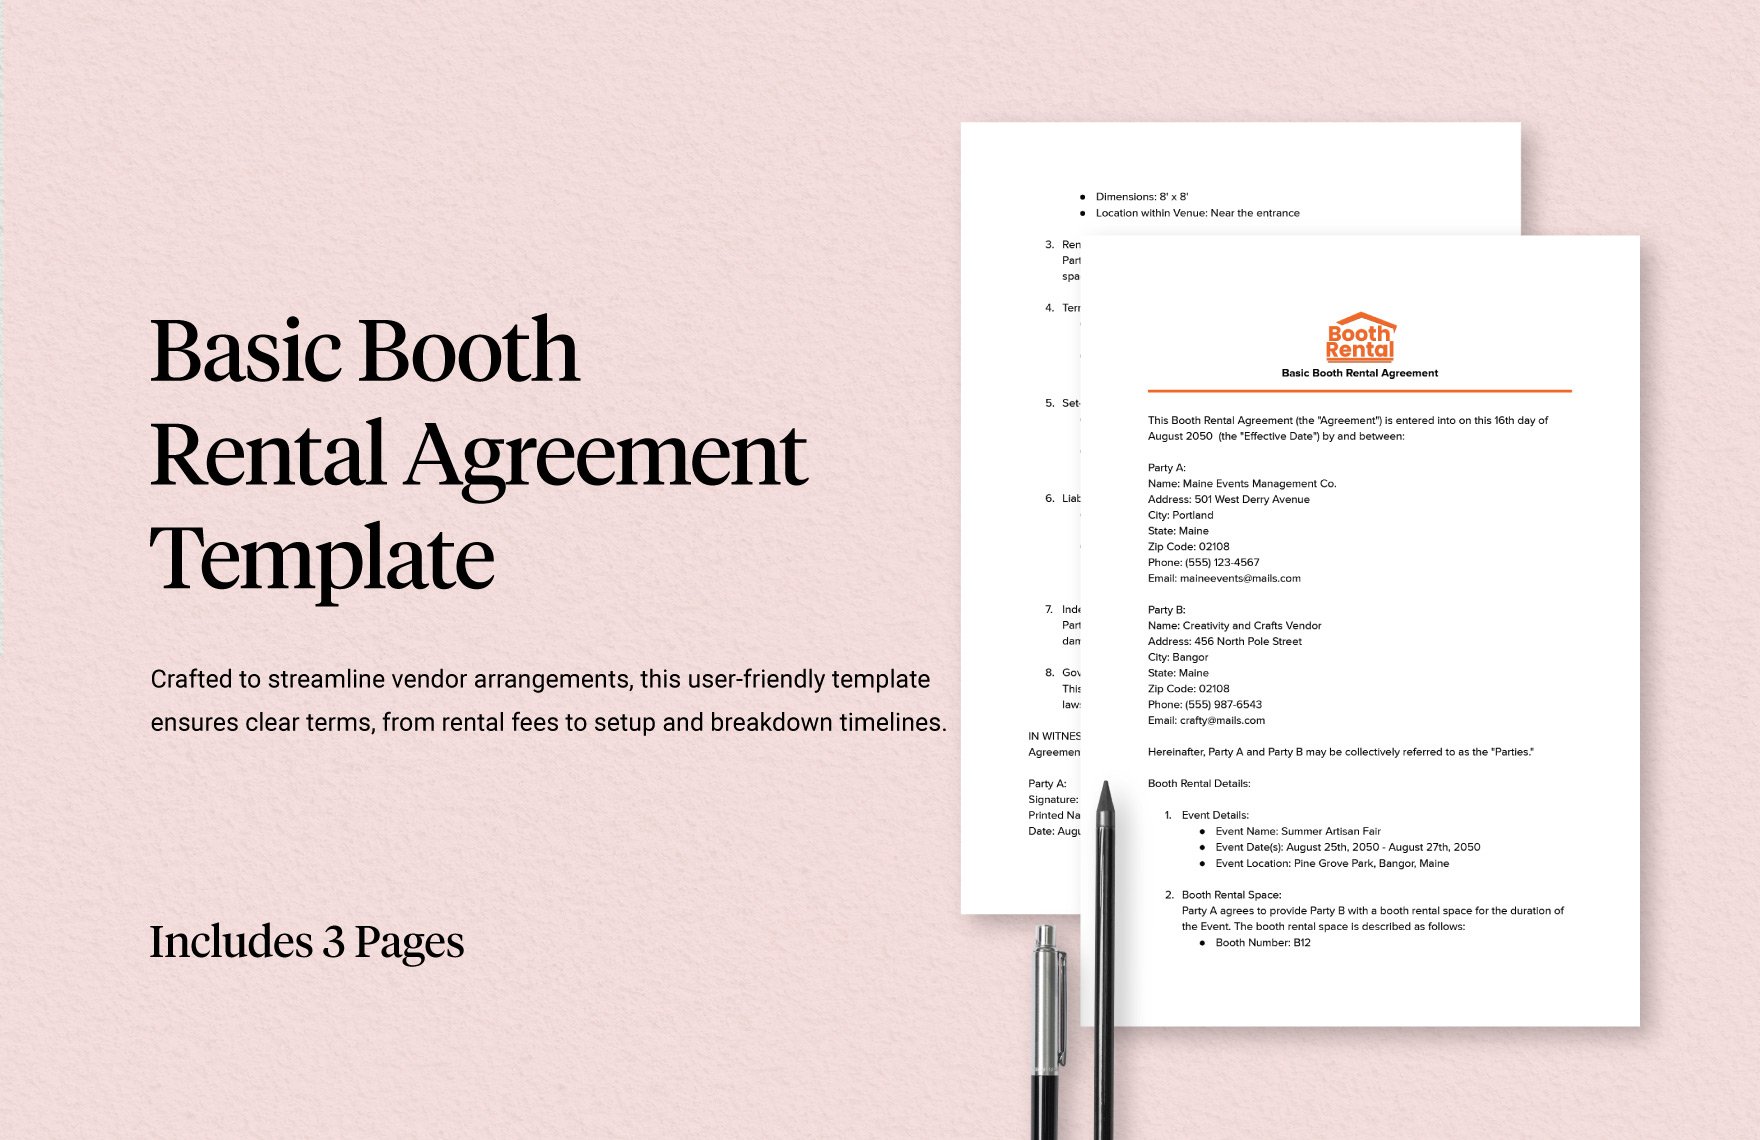 Basic Booth Rental Agreement Template